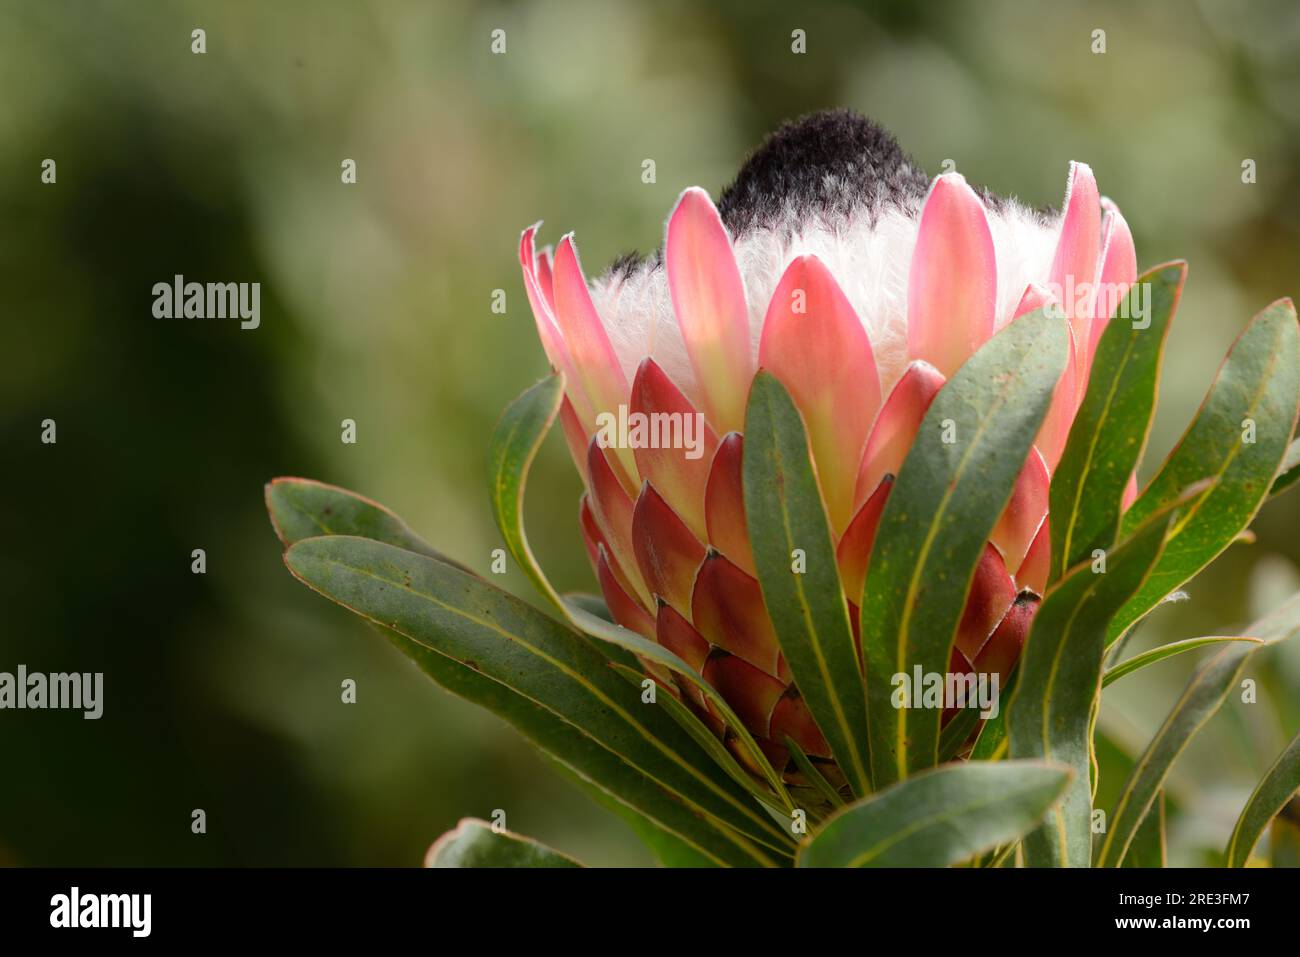 King protea South African flower with large striking pink display Stock Photo